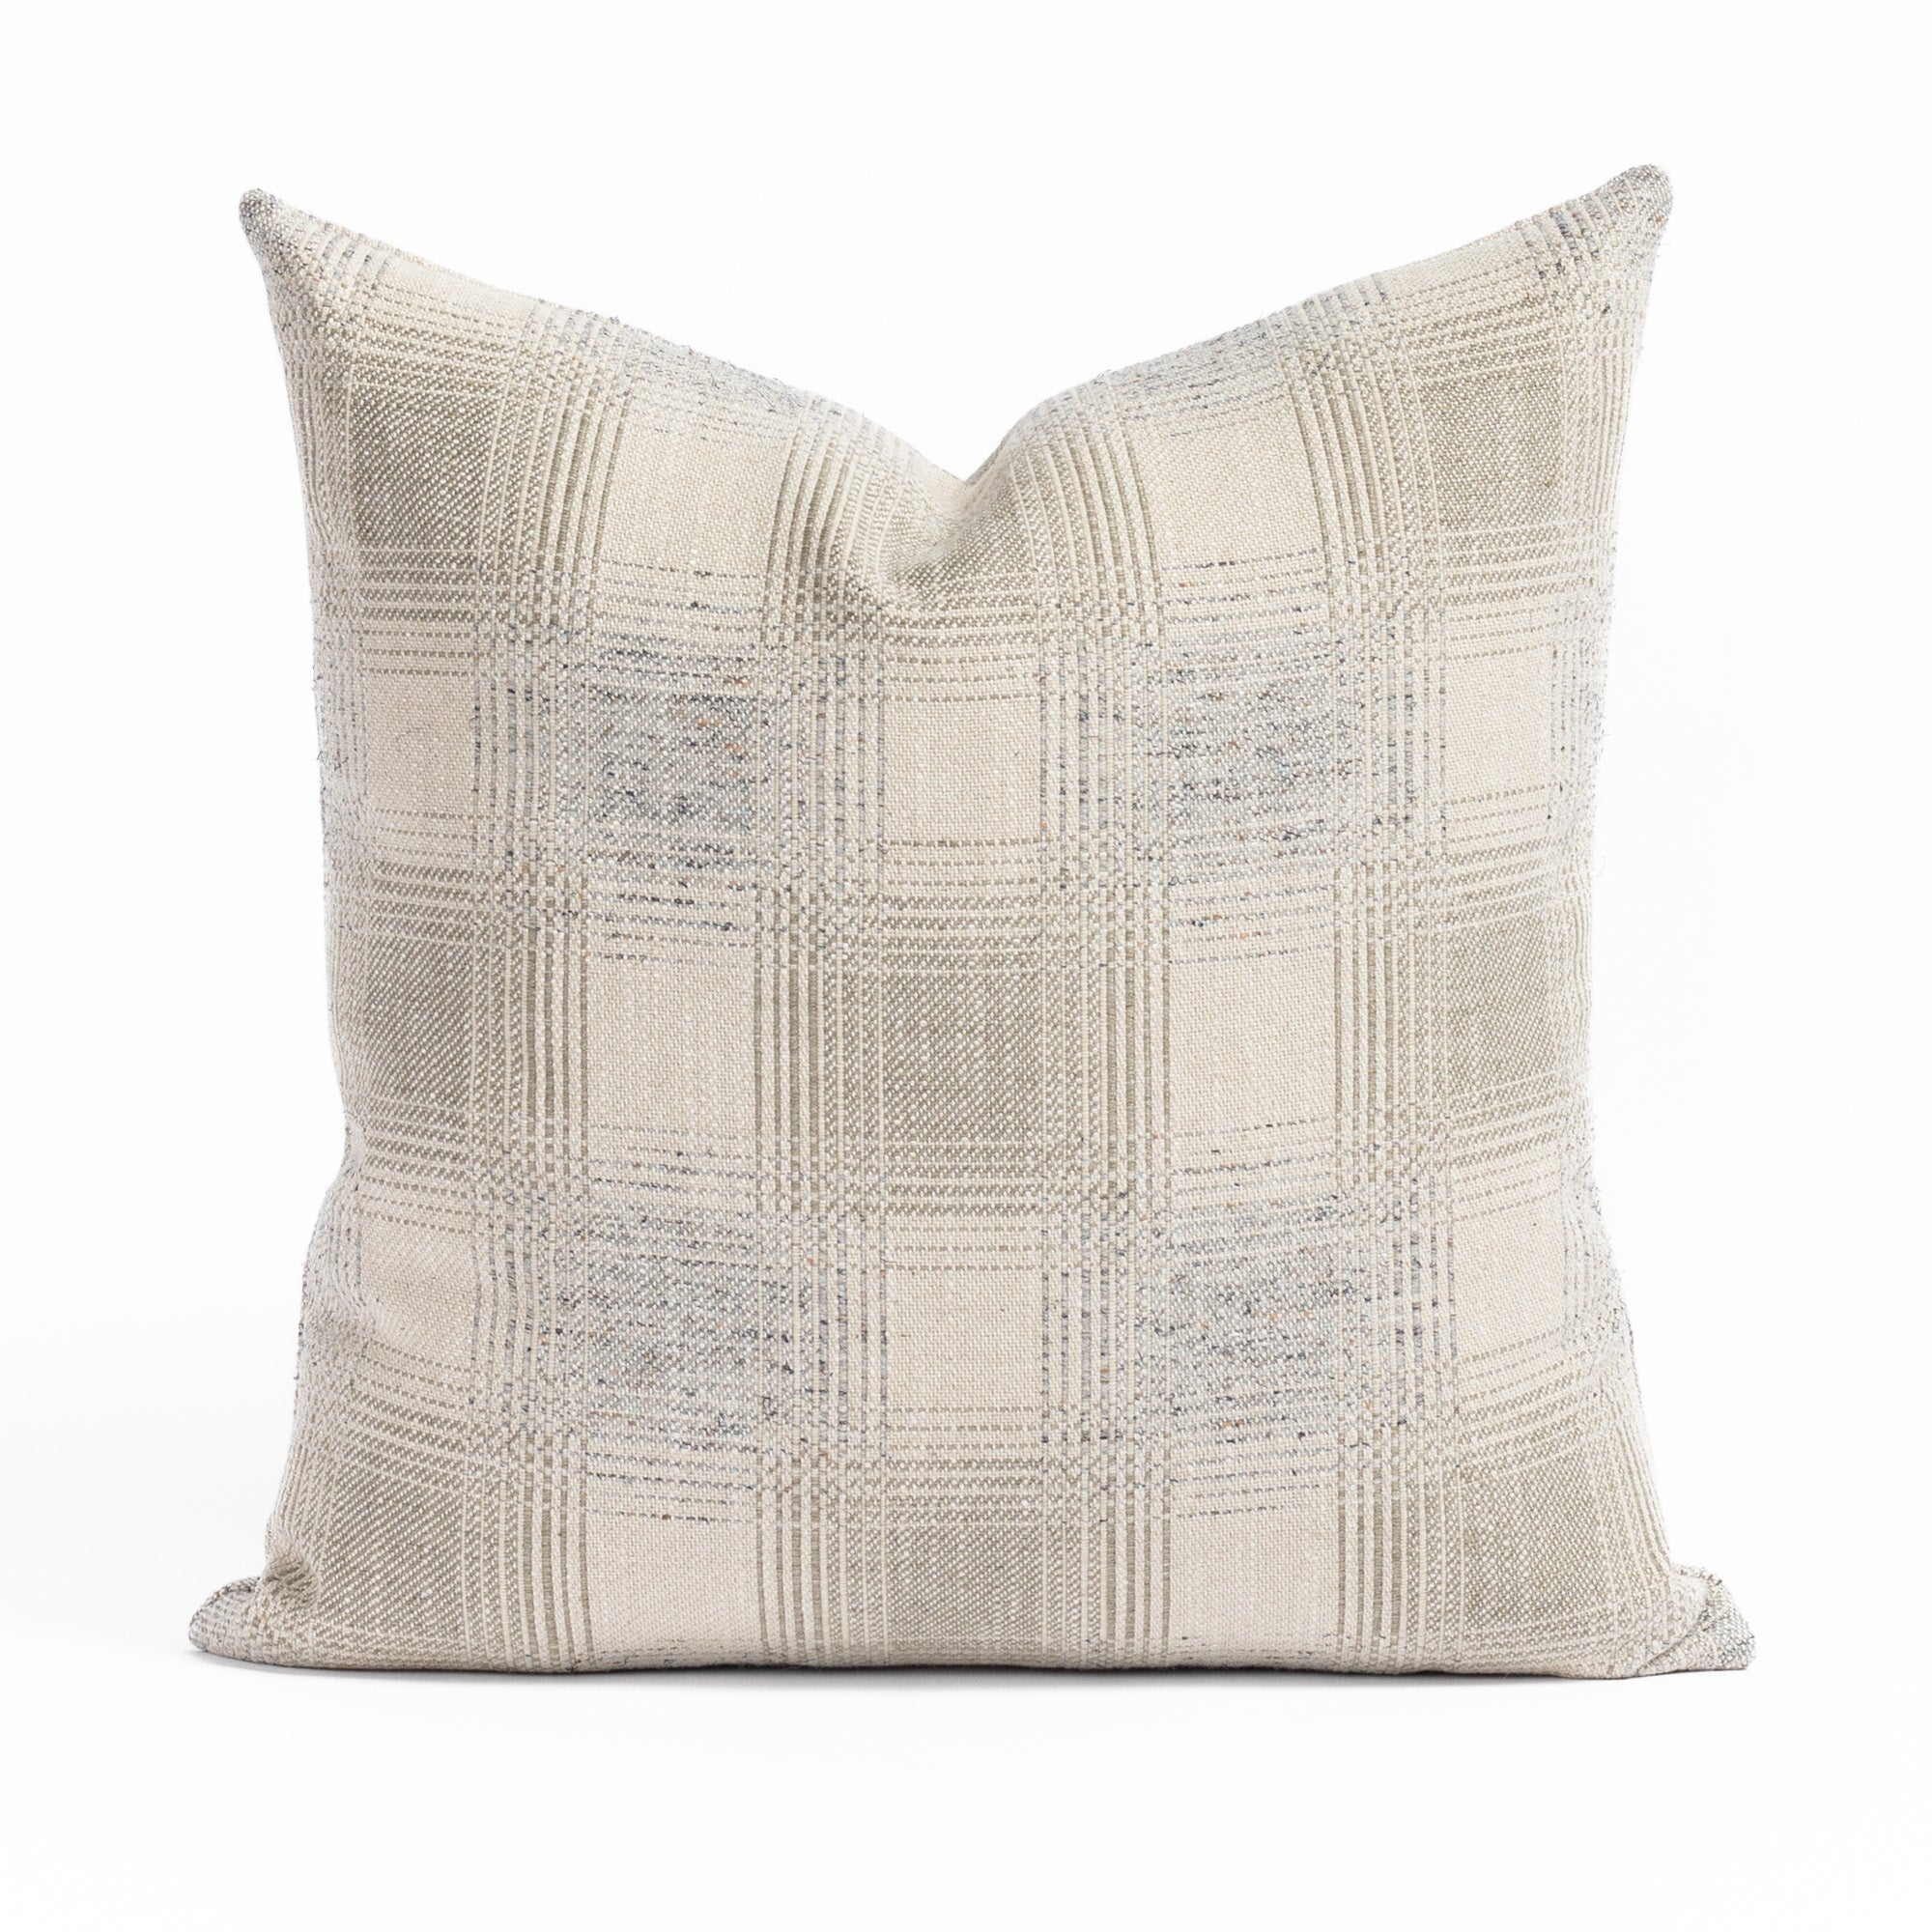 Cove 20x20 Pillow Seaside, a light gray and denim blue plaid throw pillow from Tonic Living